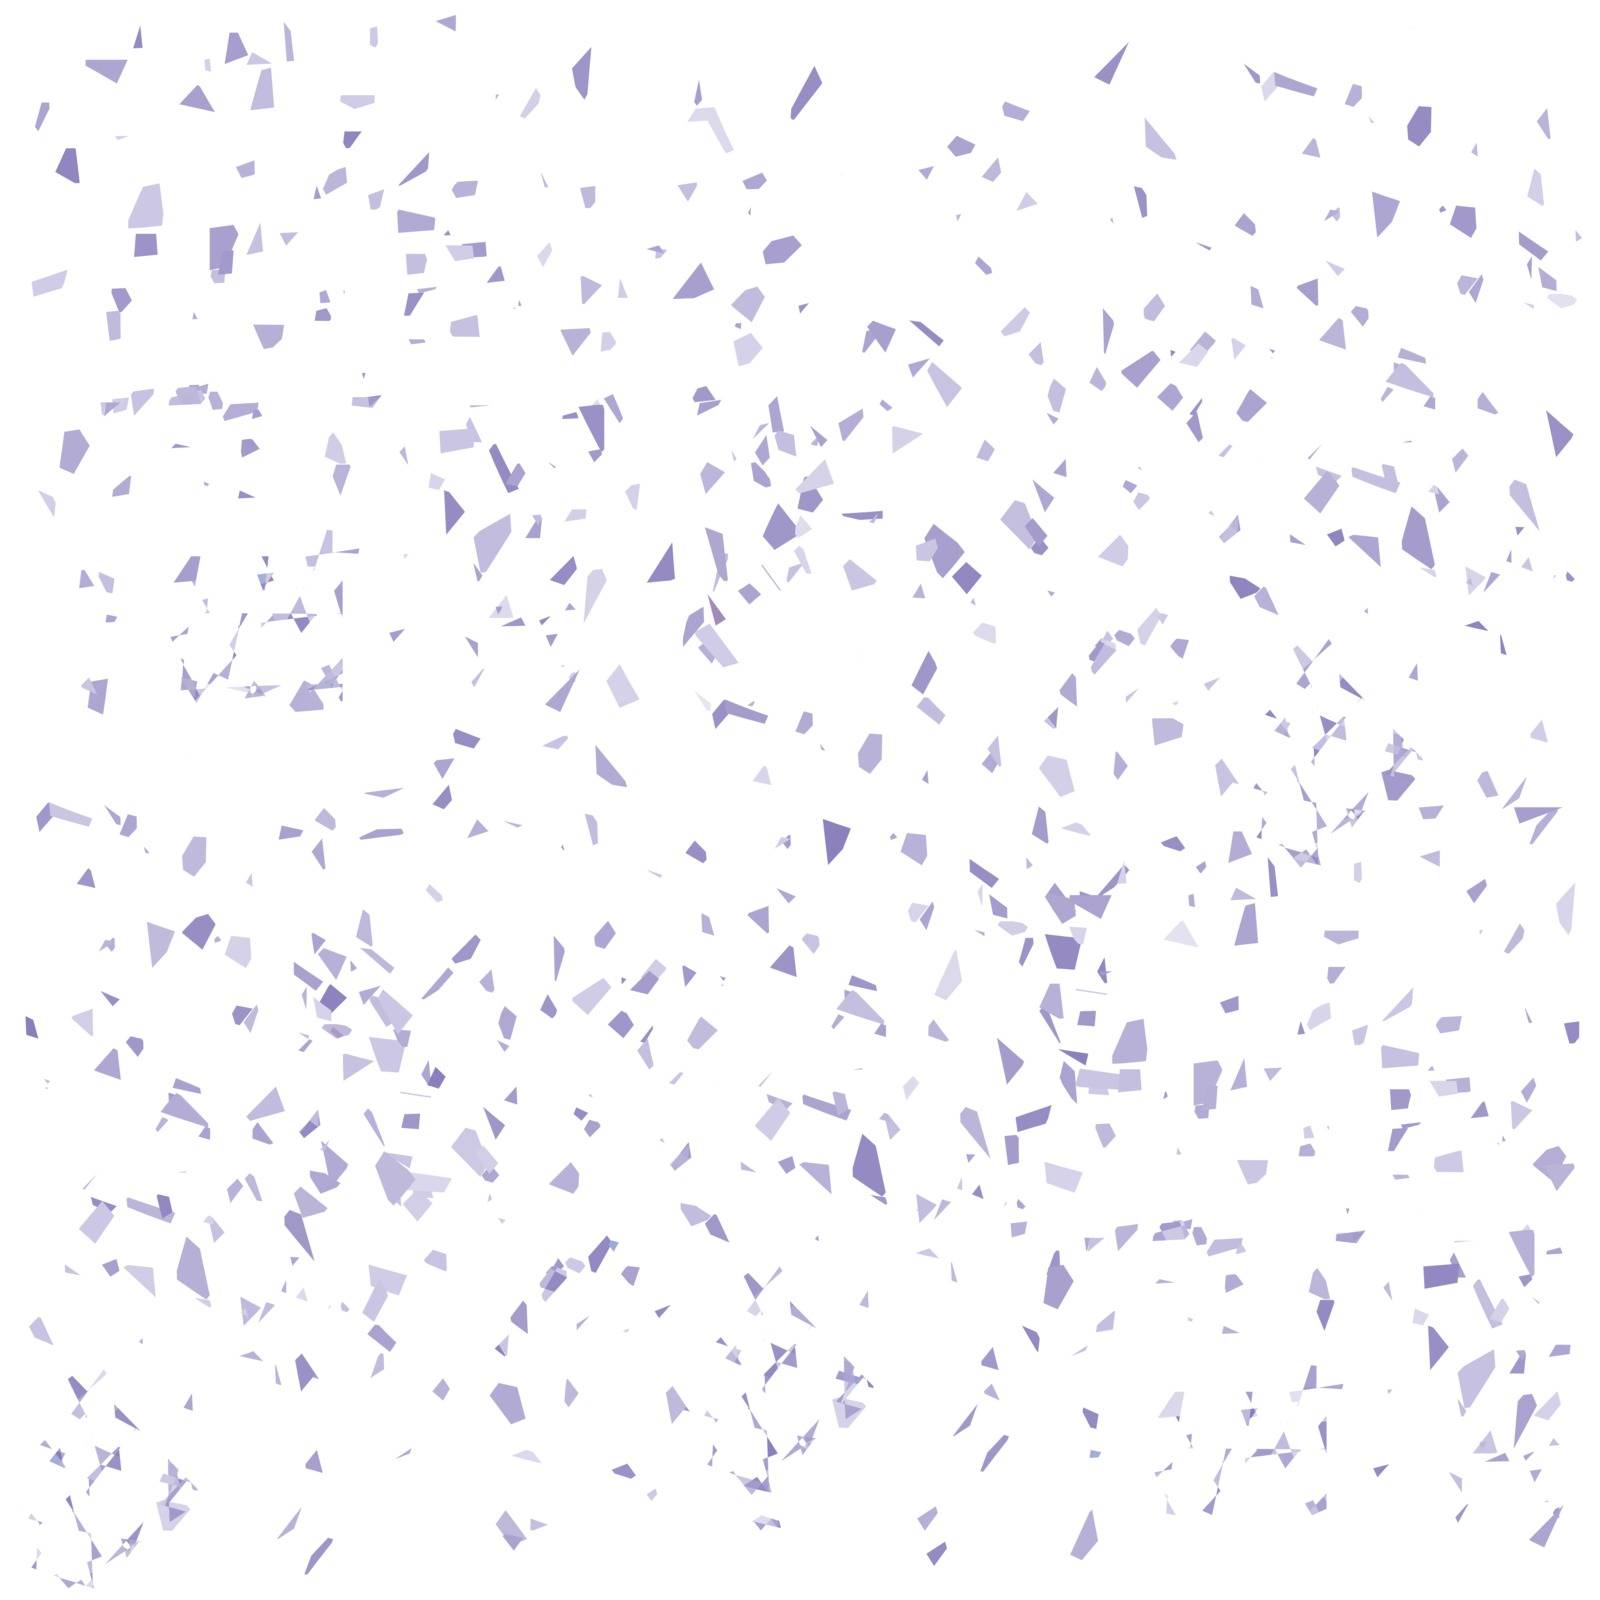 Confetti Isolated on White Background for Your Design